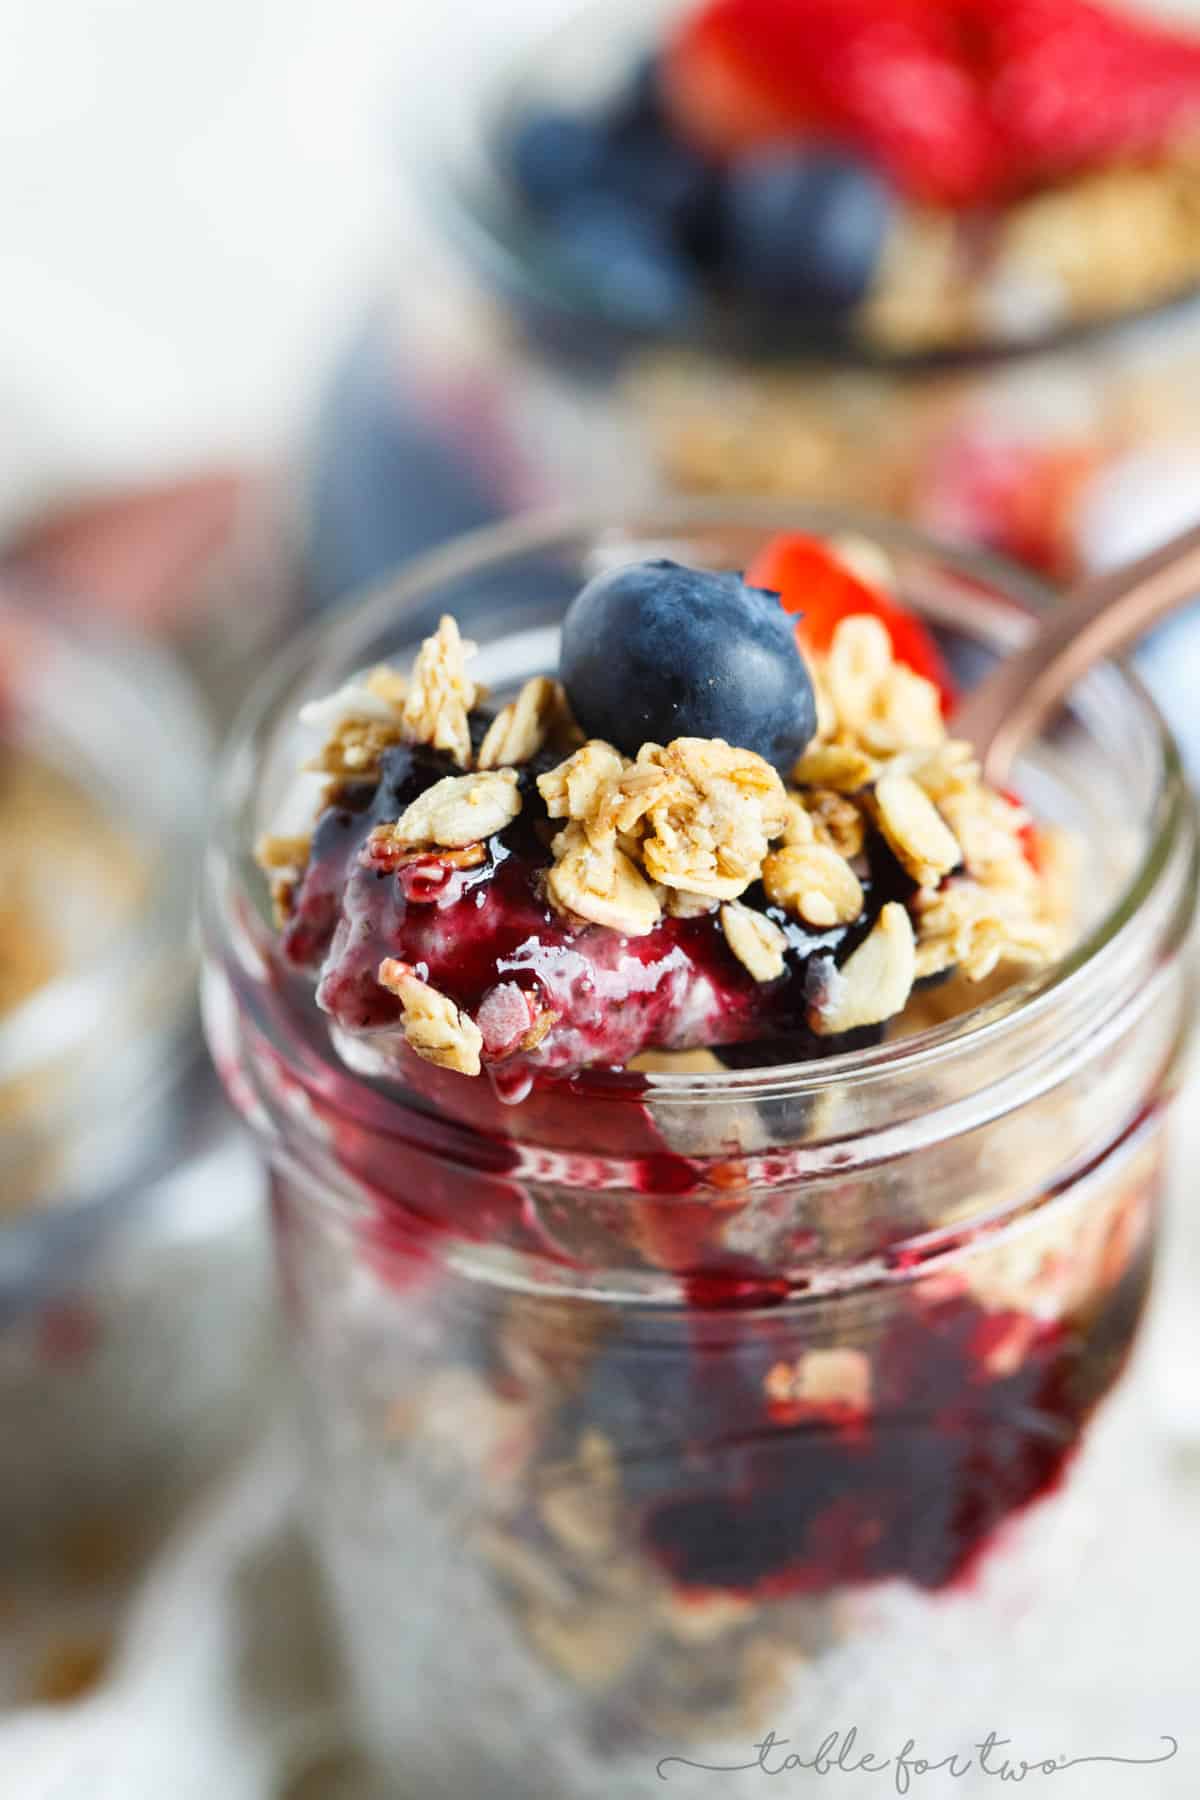 Coconut chia seed pudding with berries and granola is an easy breakfast option packed with flavor and nutrients! It's loaded with fiber, protein, Omega-3 fatty acids and various micronutrients!